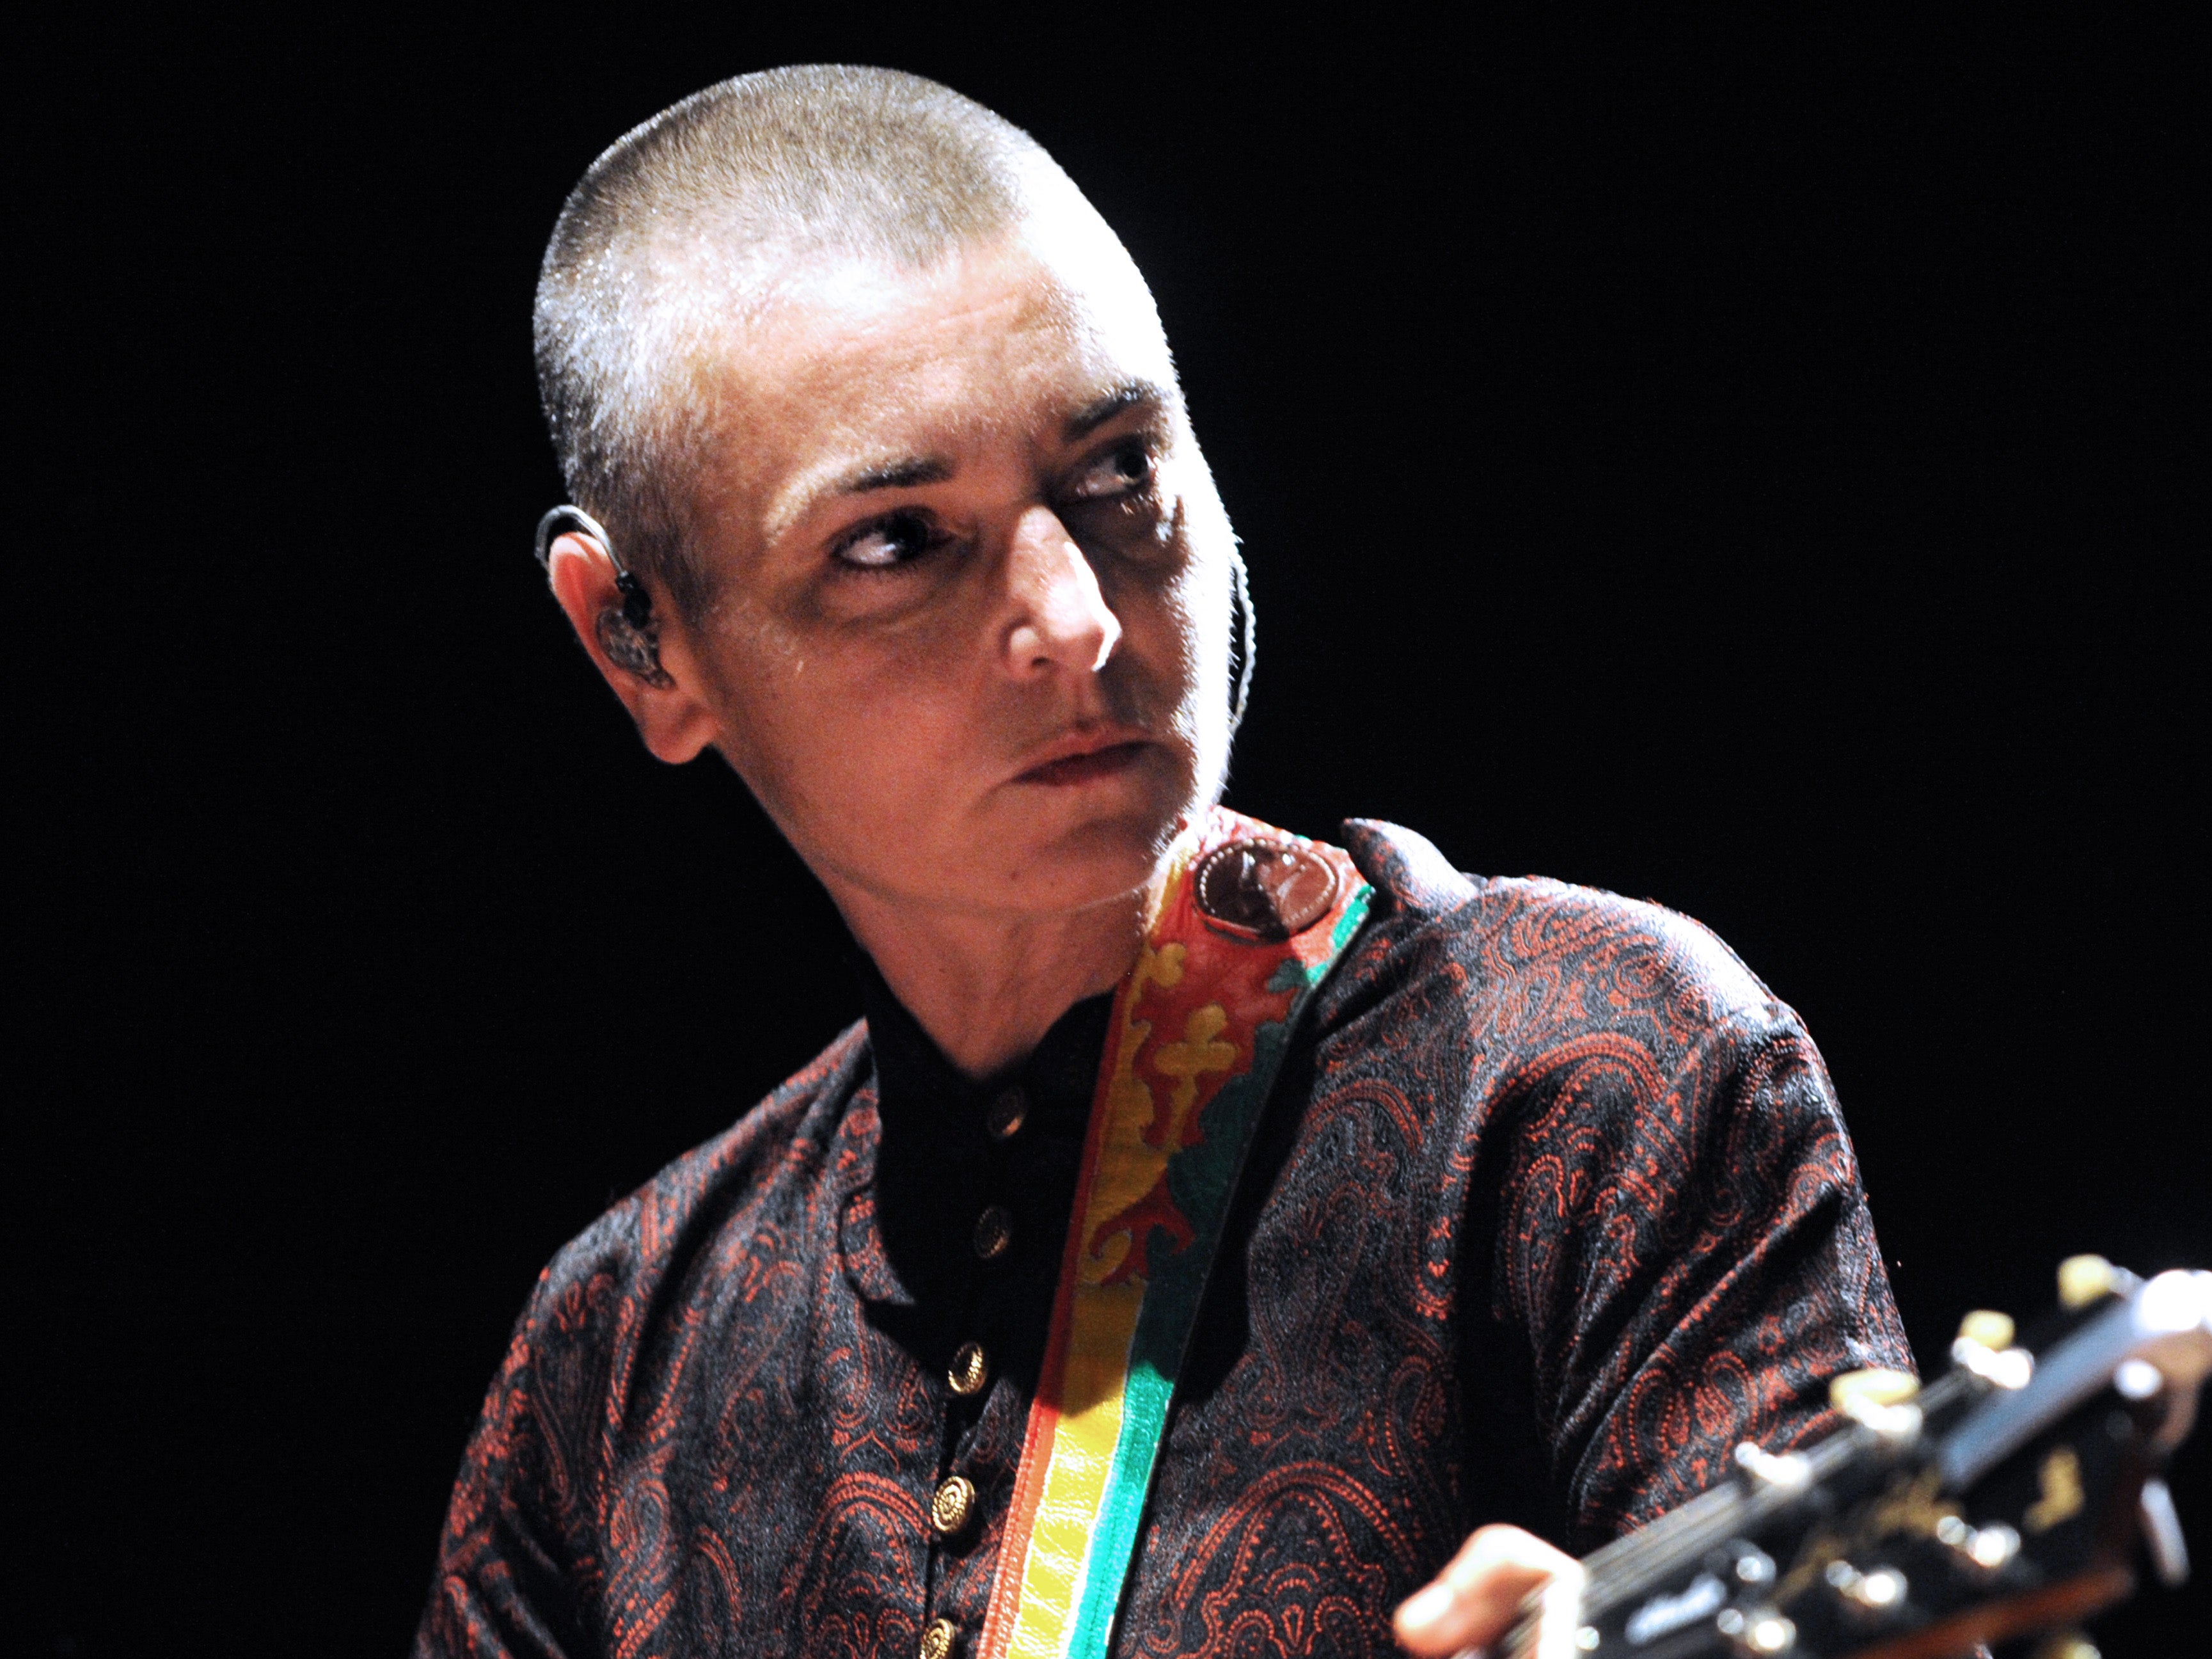 Sinéad O'Connor has spoken in the past about her traumatic relationship with her mother